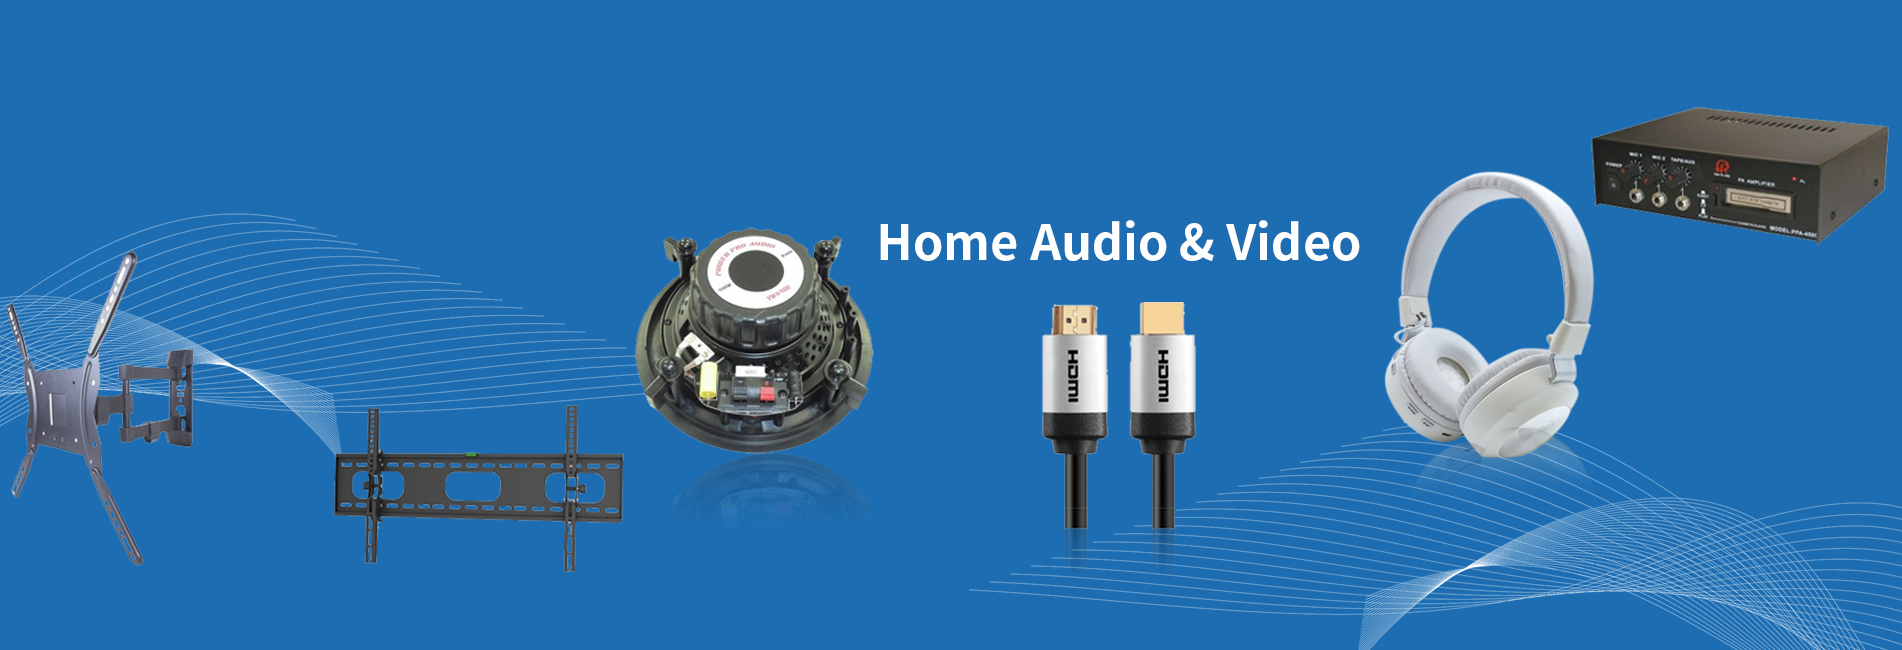 Home Audio & Video banner_1